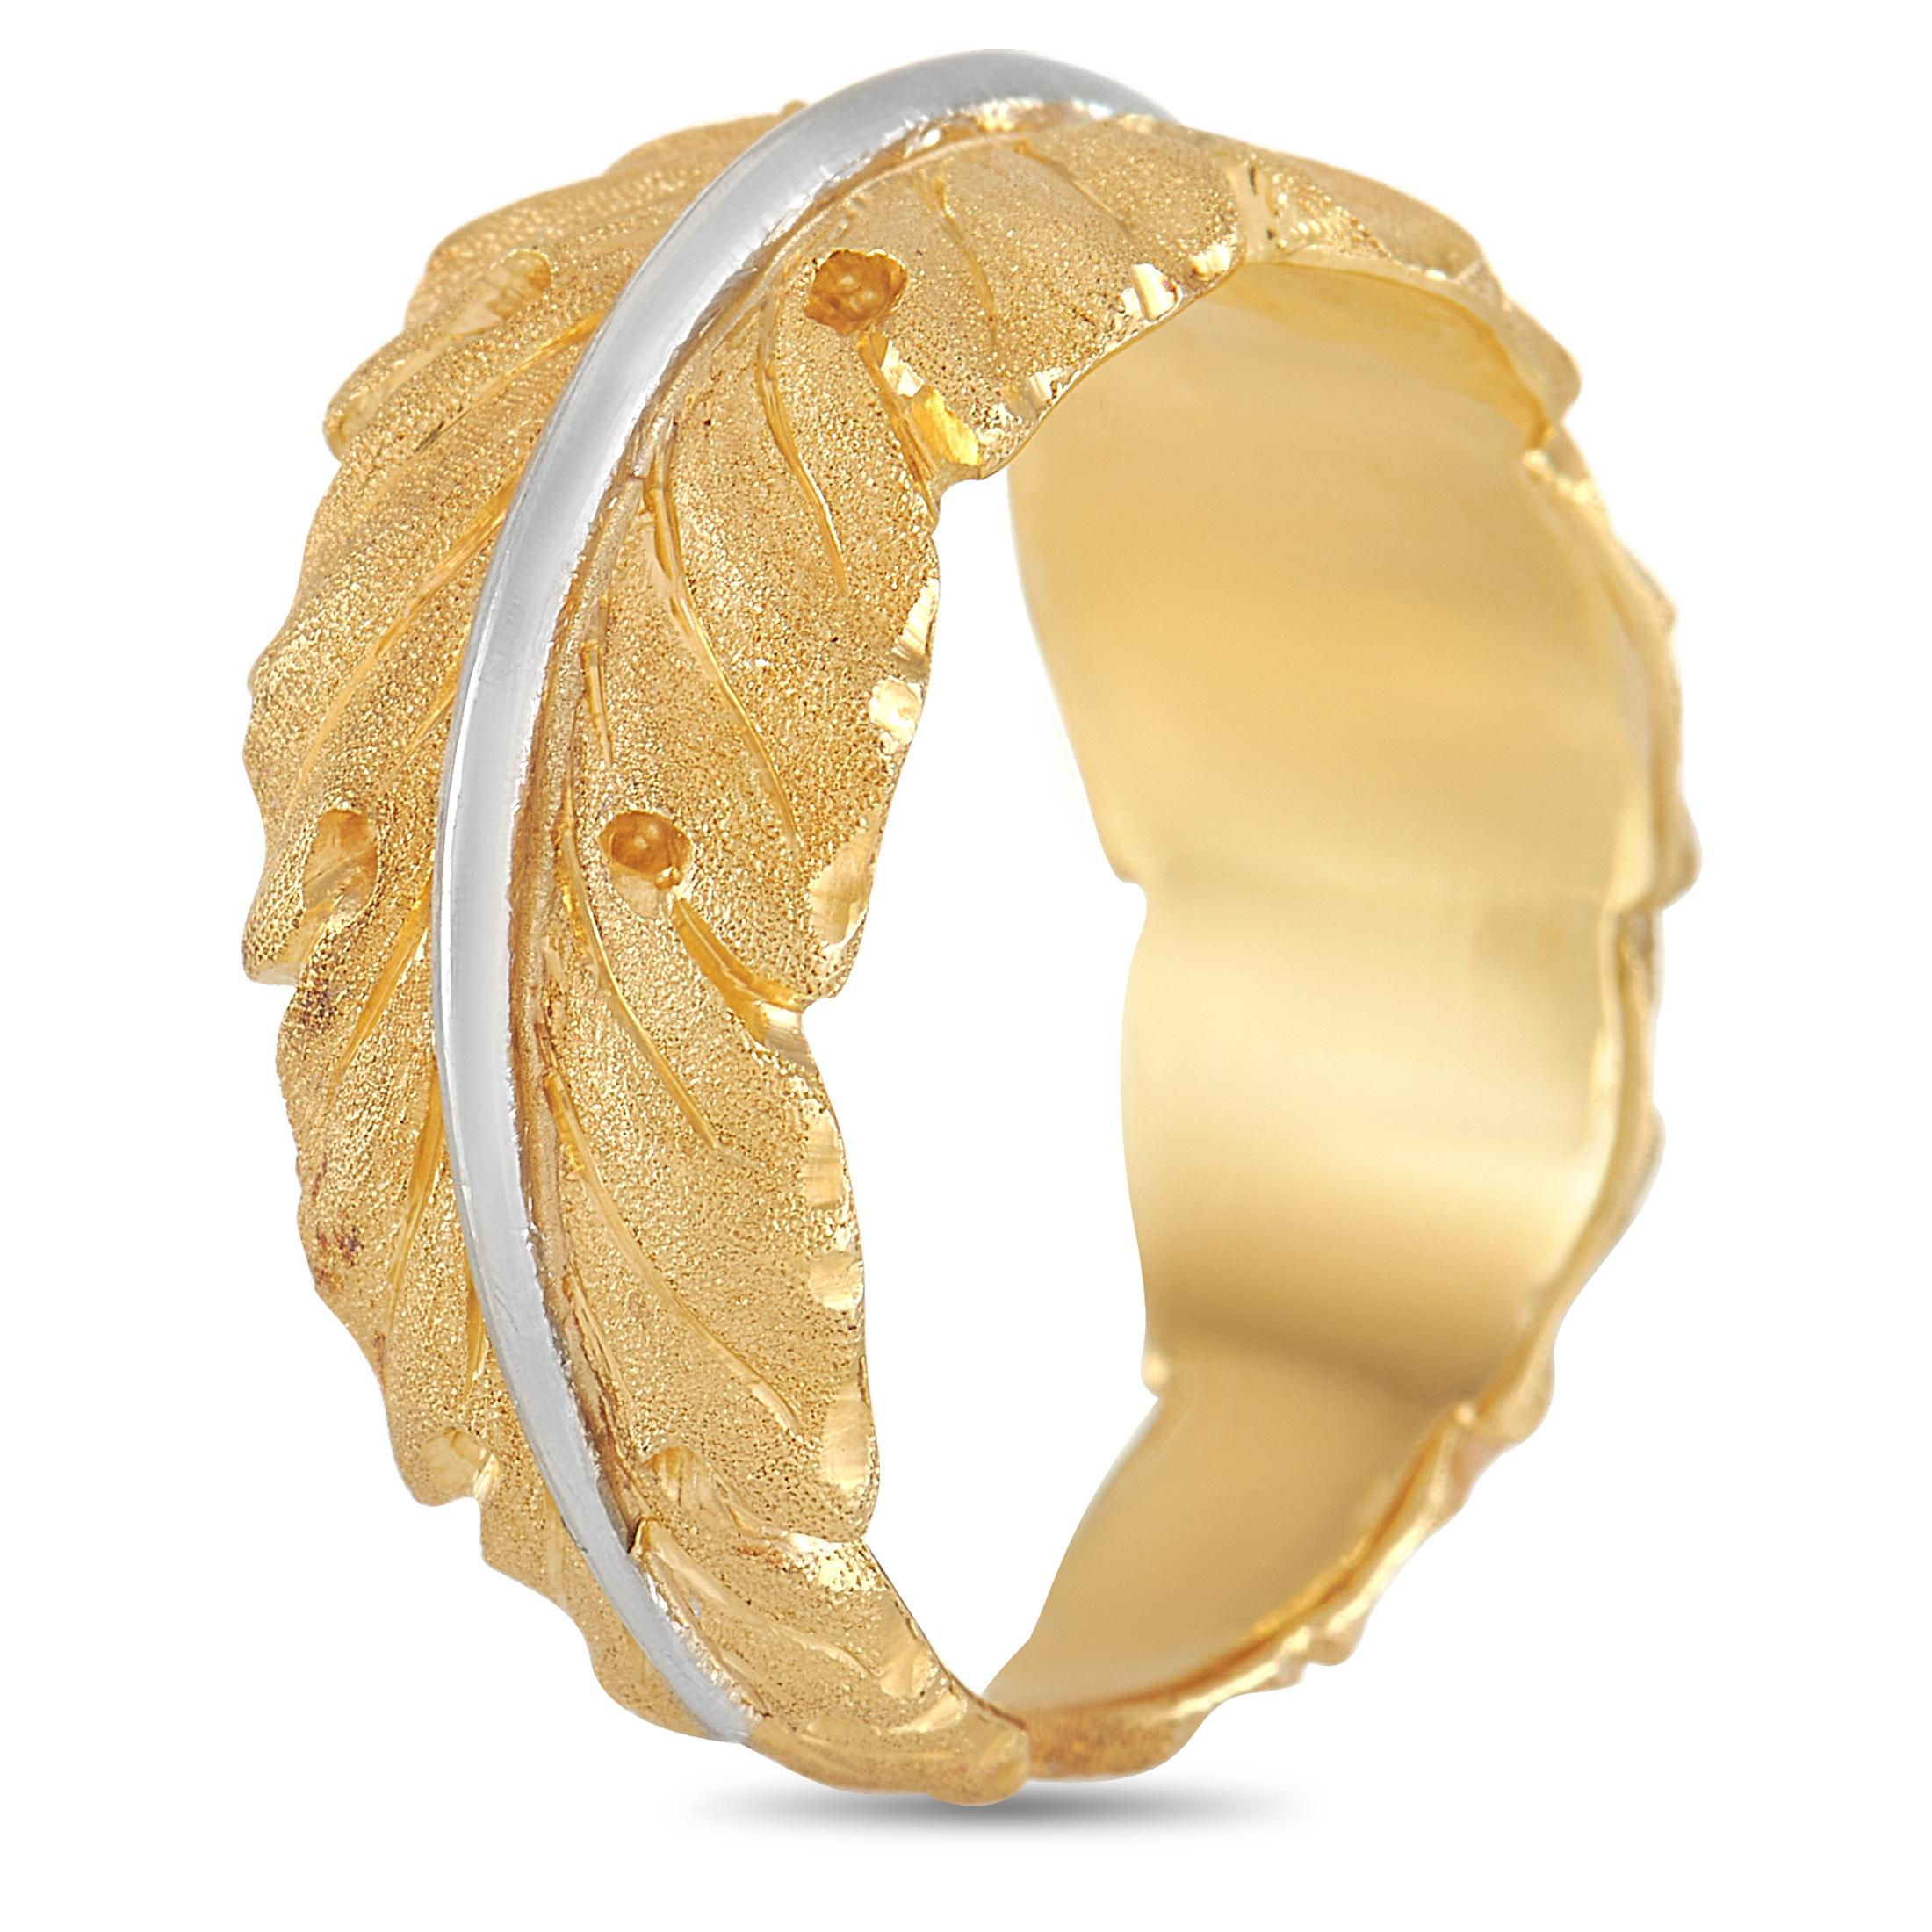 The Buccellati 18K Yellow Gold & 18K White Gold Leaf Ring is designed with an open band creatively sculpted to form a leaf-like profile. The yellow gold surface features the hand-etched engraving Buccellati is renowned for. On its center is a solid